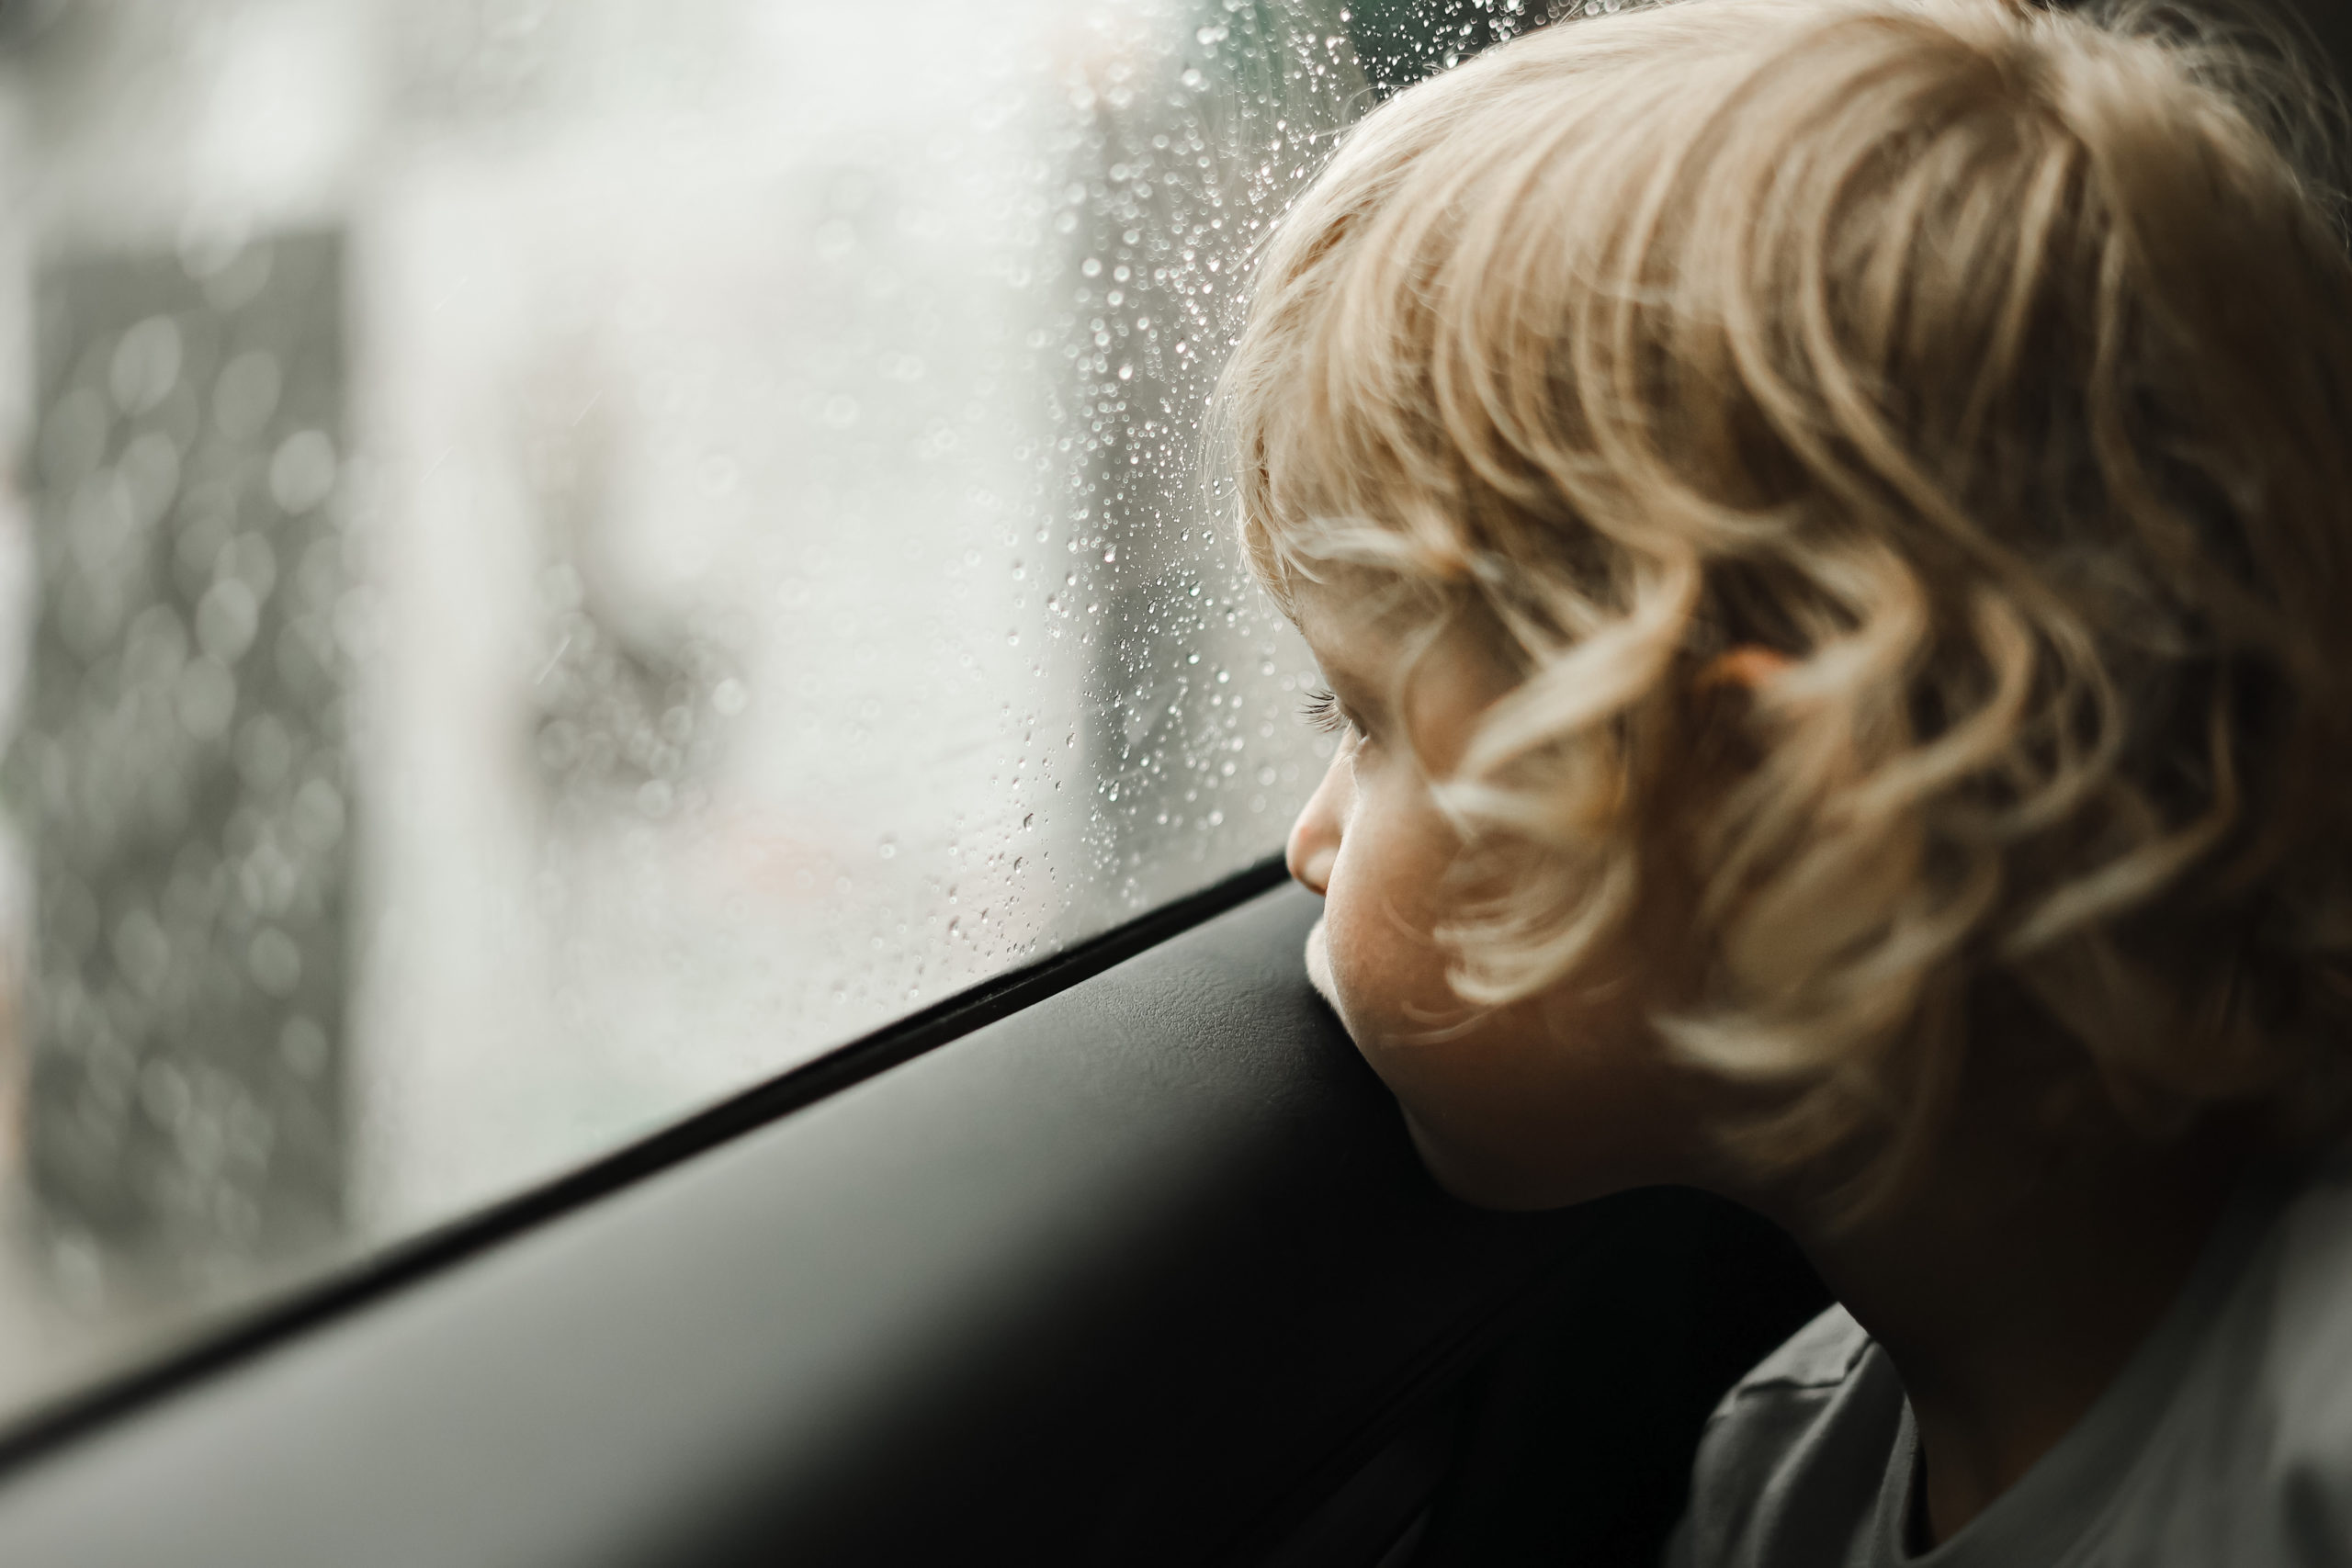 A child looks through a window of a car on a rainy day.